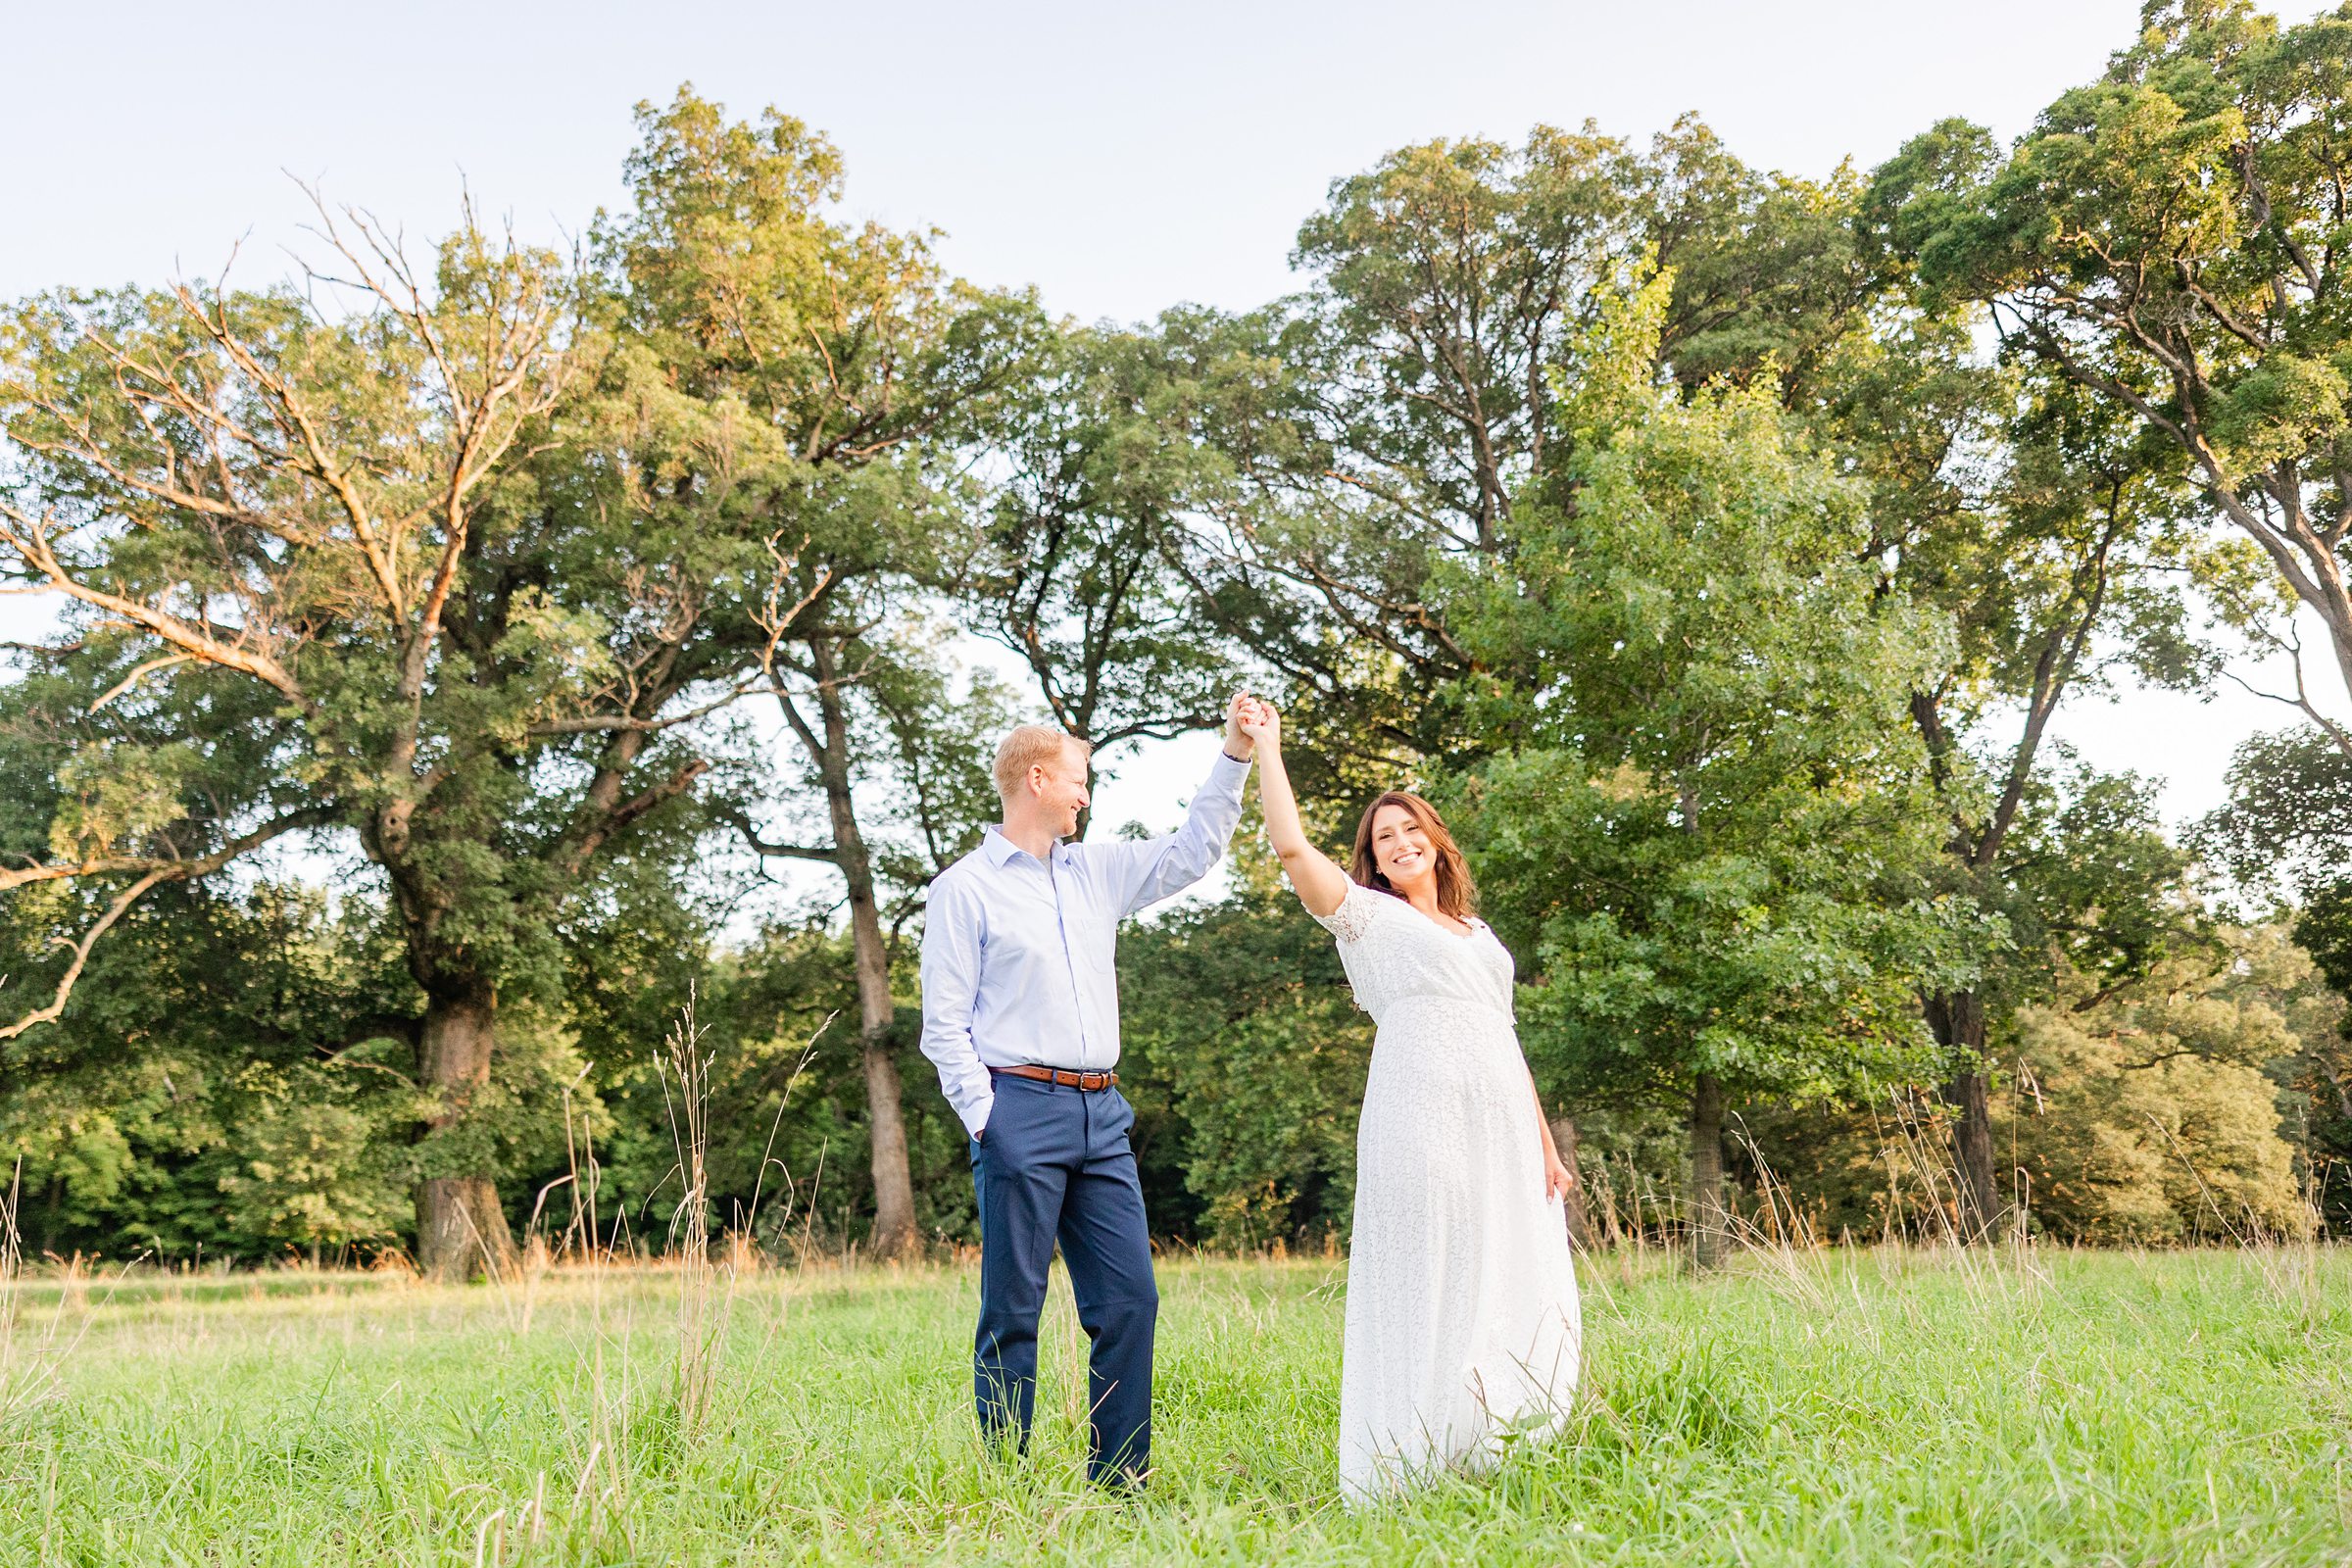 Couple celebrate their engagement in the countryside of central Illinois. Photo taken by Illinois Wedding Photographers, Joanna & Brett